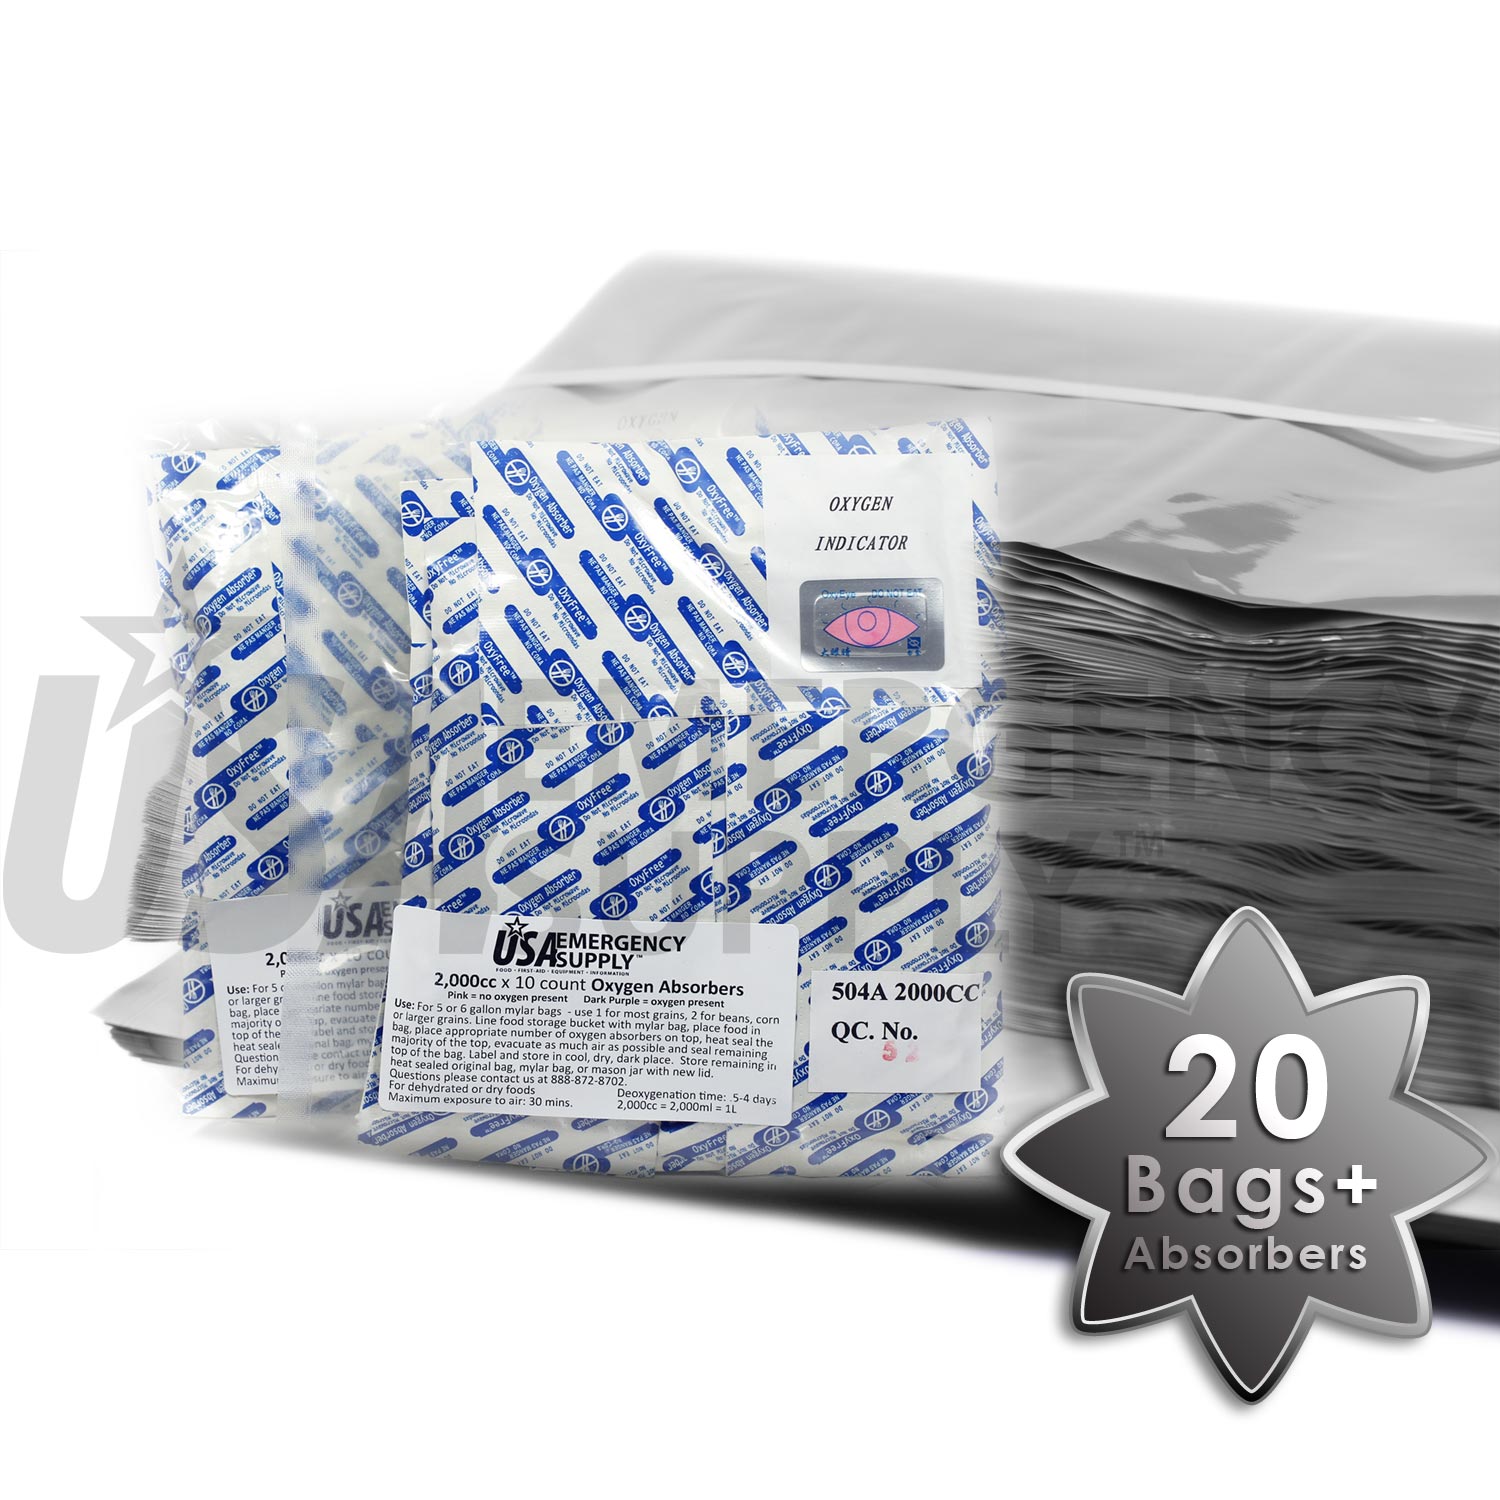 5 Gallon Mylar Storage Bags with Individually Wrapped Oxygen